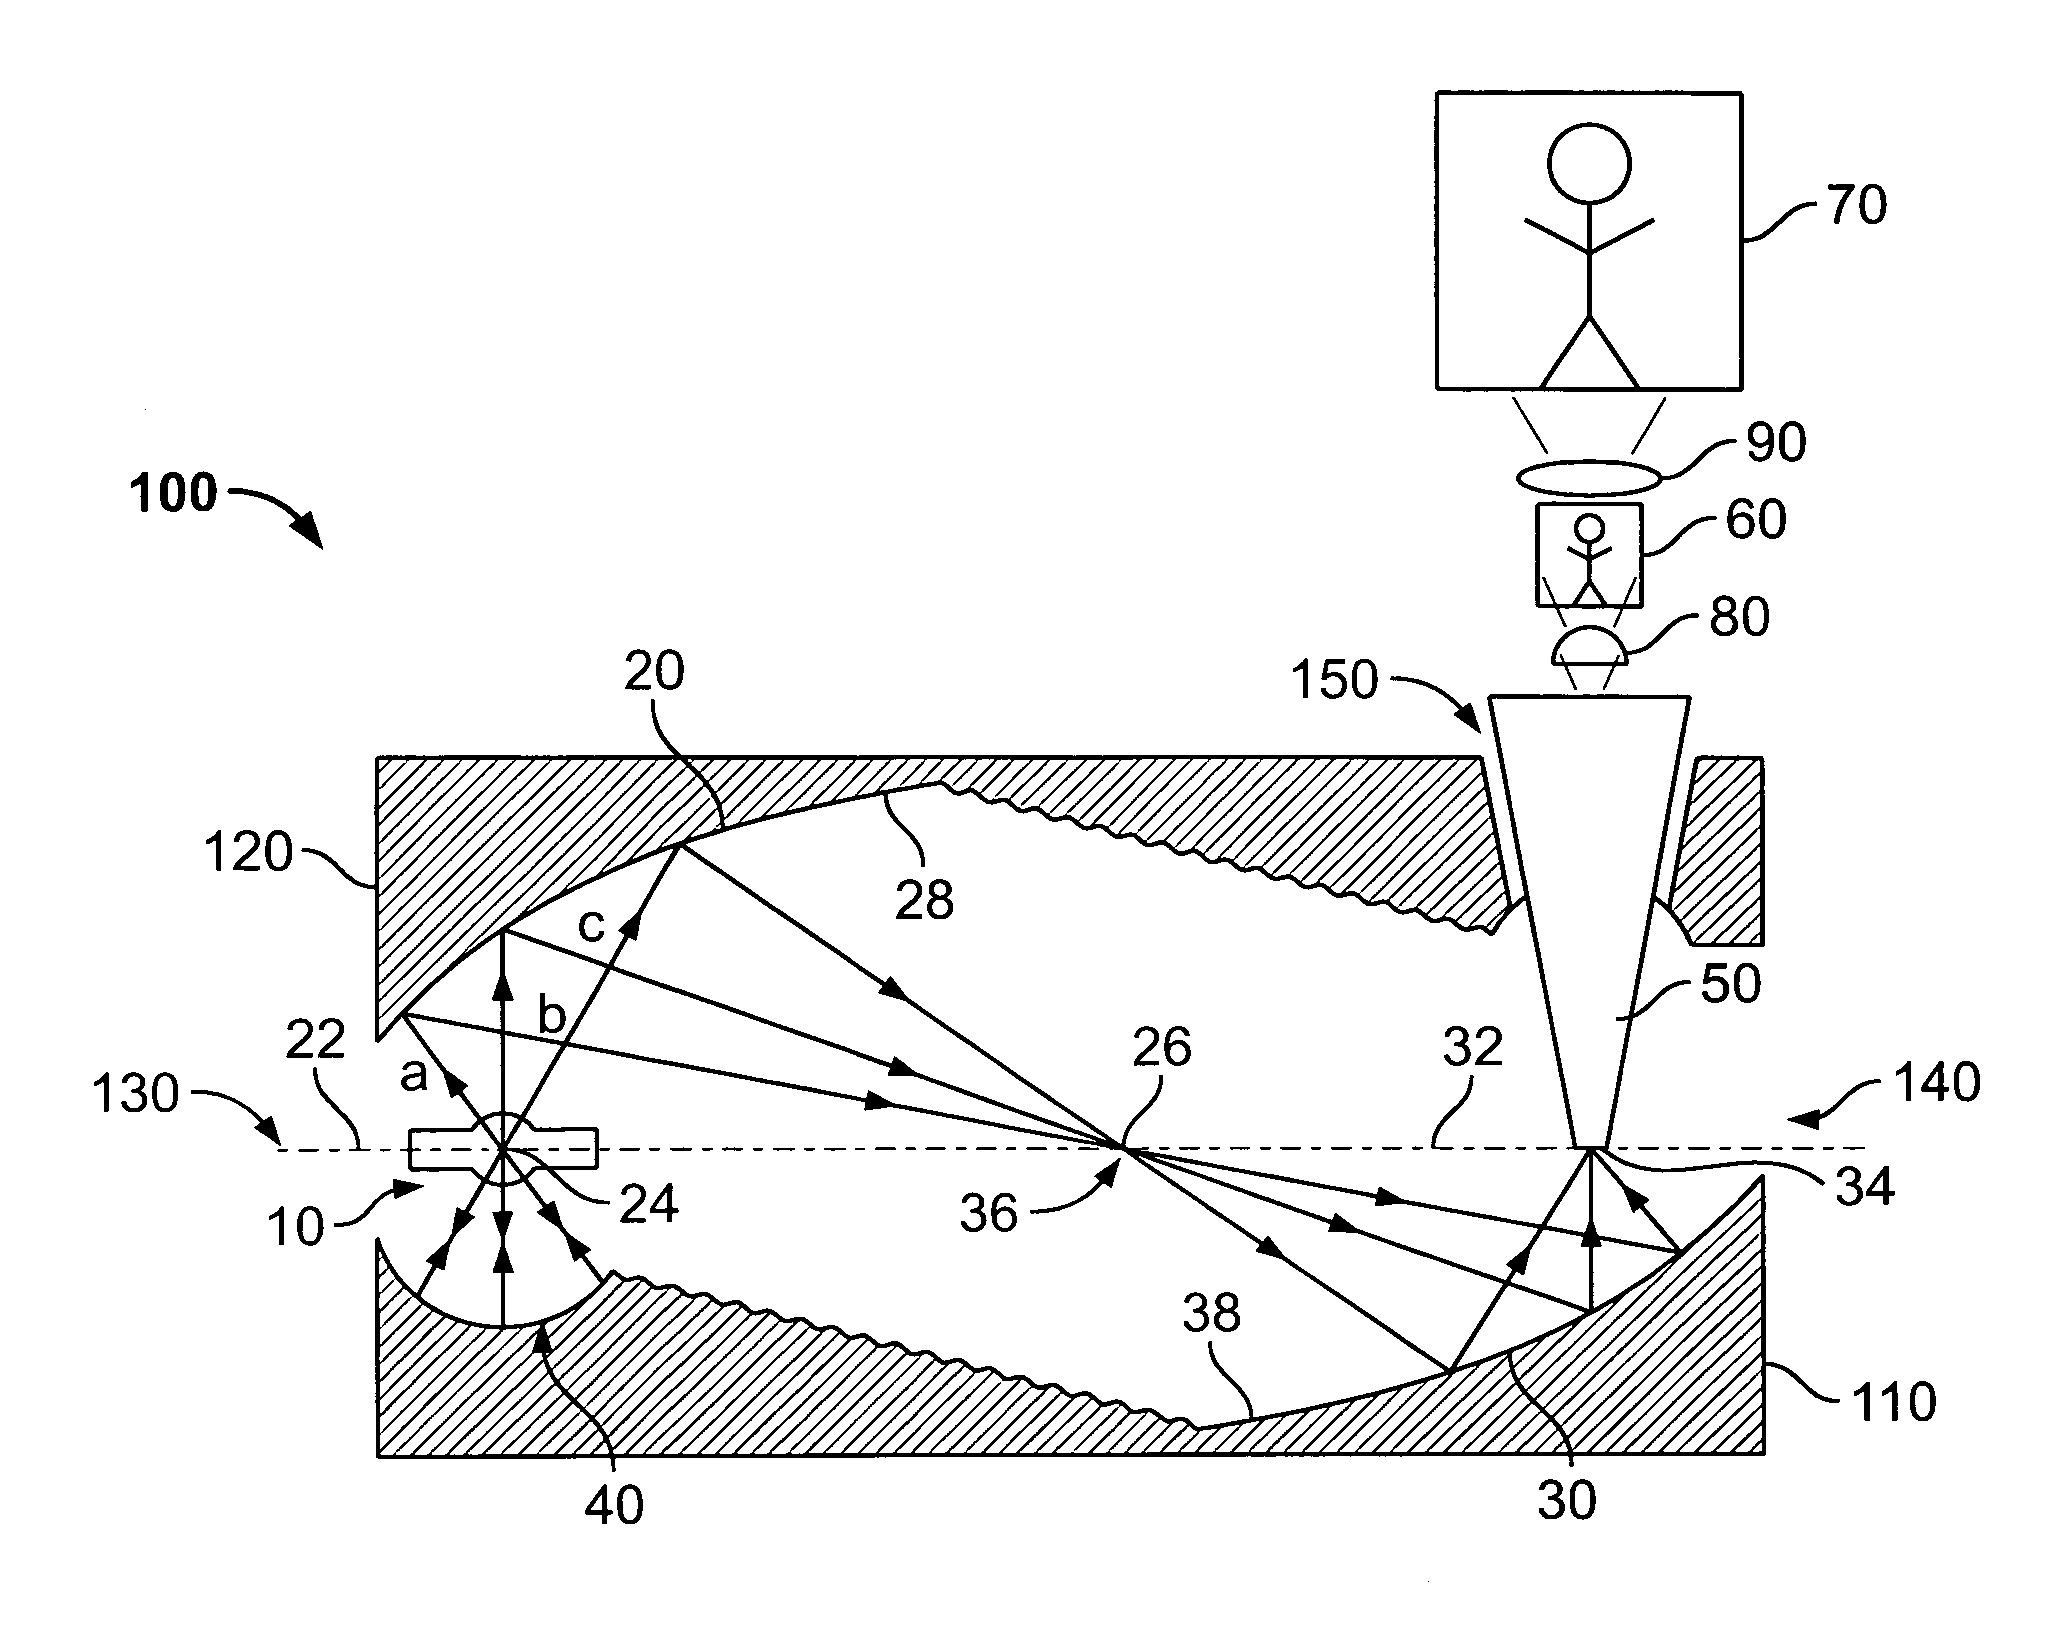 Compact dual ellipsoidal reflector (DER) system having two molded ellipsoidal modules such that a radiation receiving module reflects a portion of rays to an opening in the other module